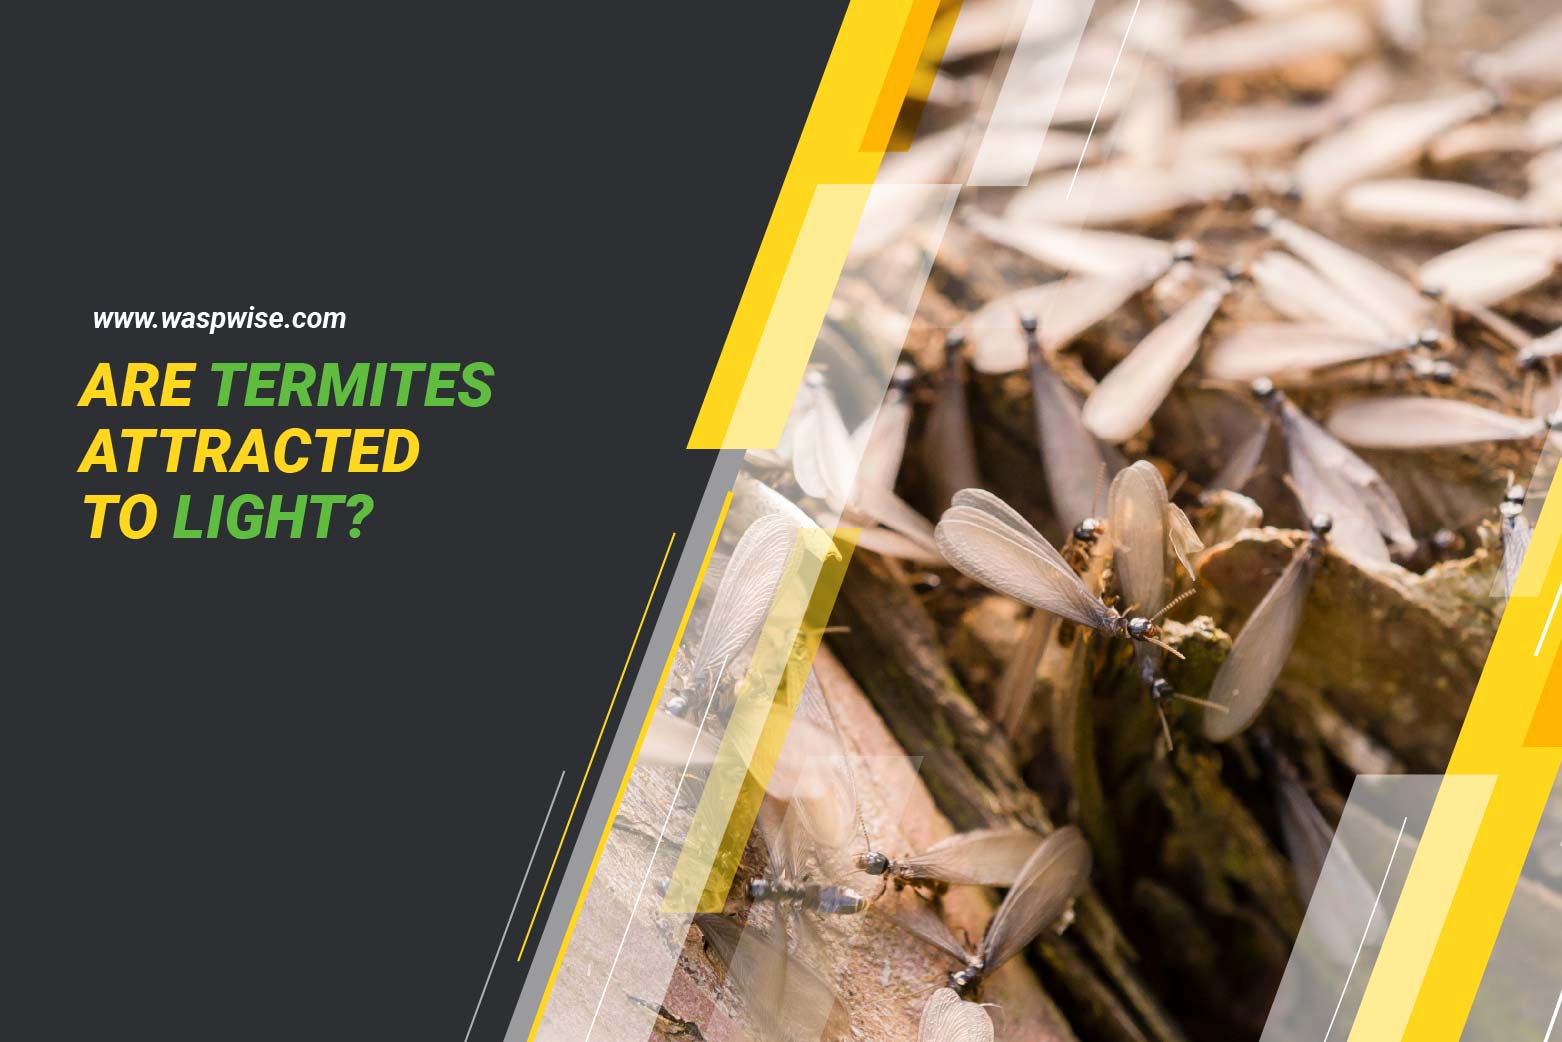 Are termites attracted to light